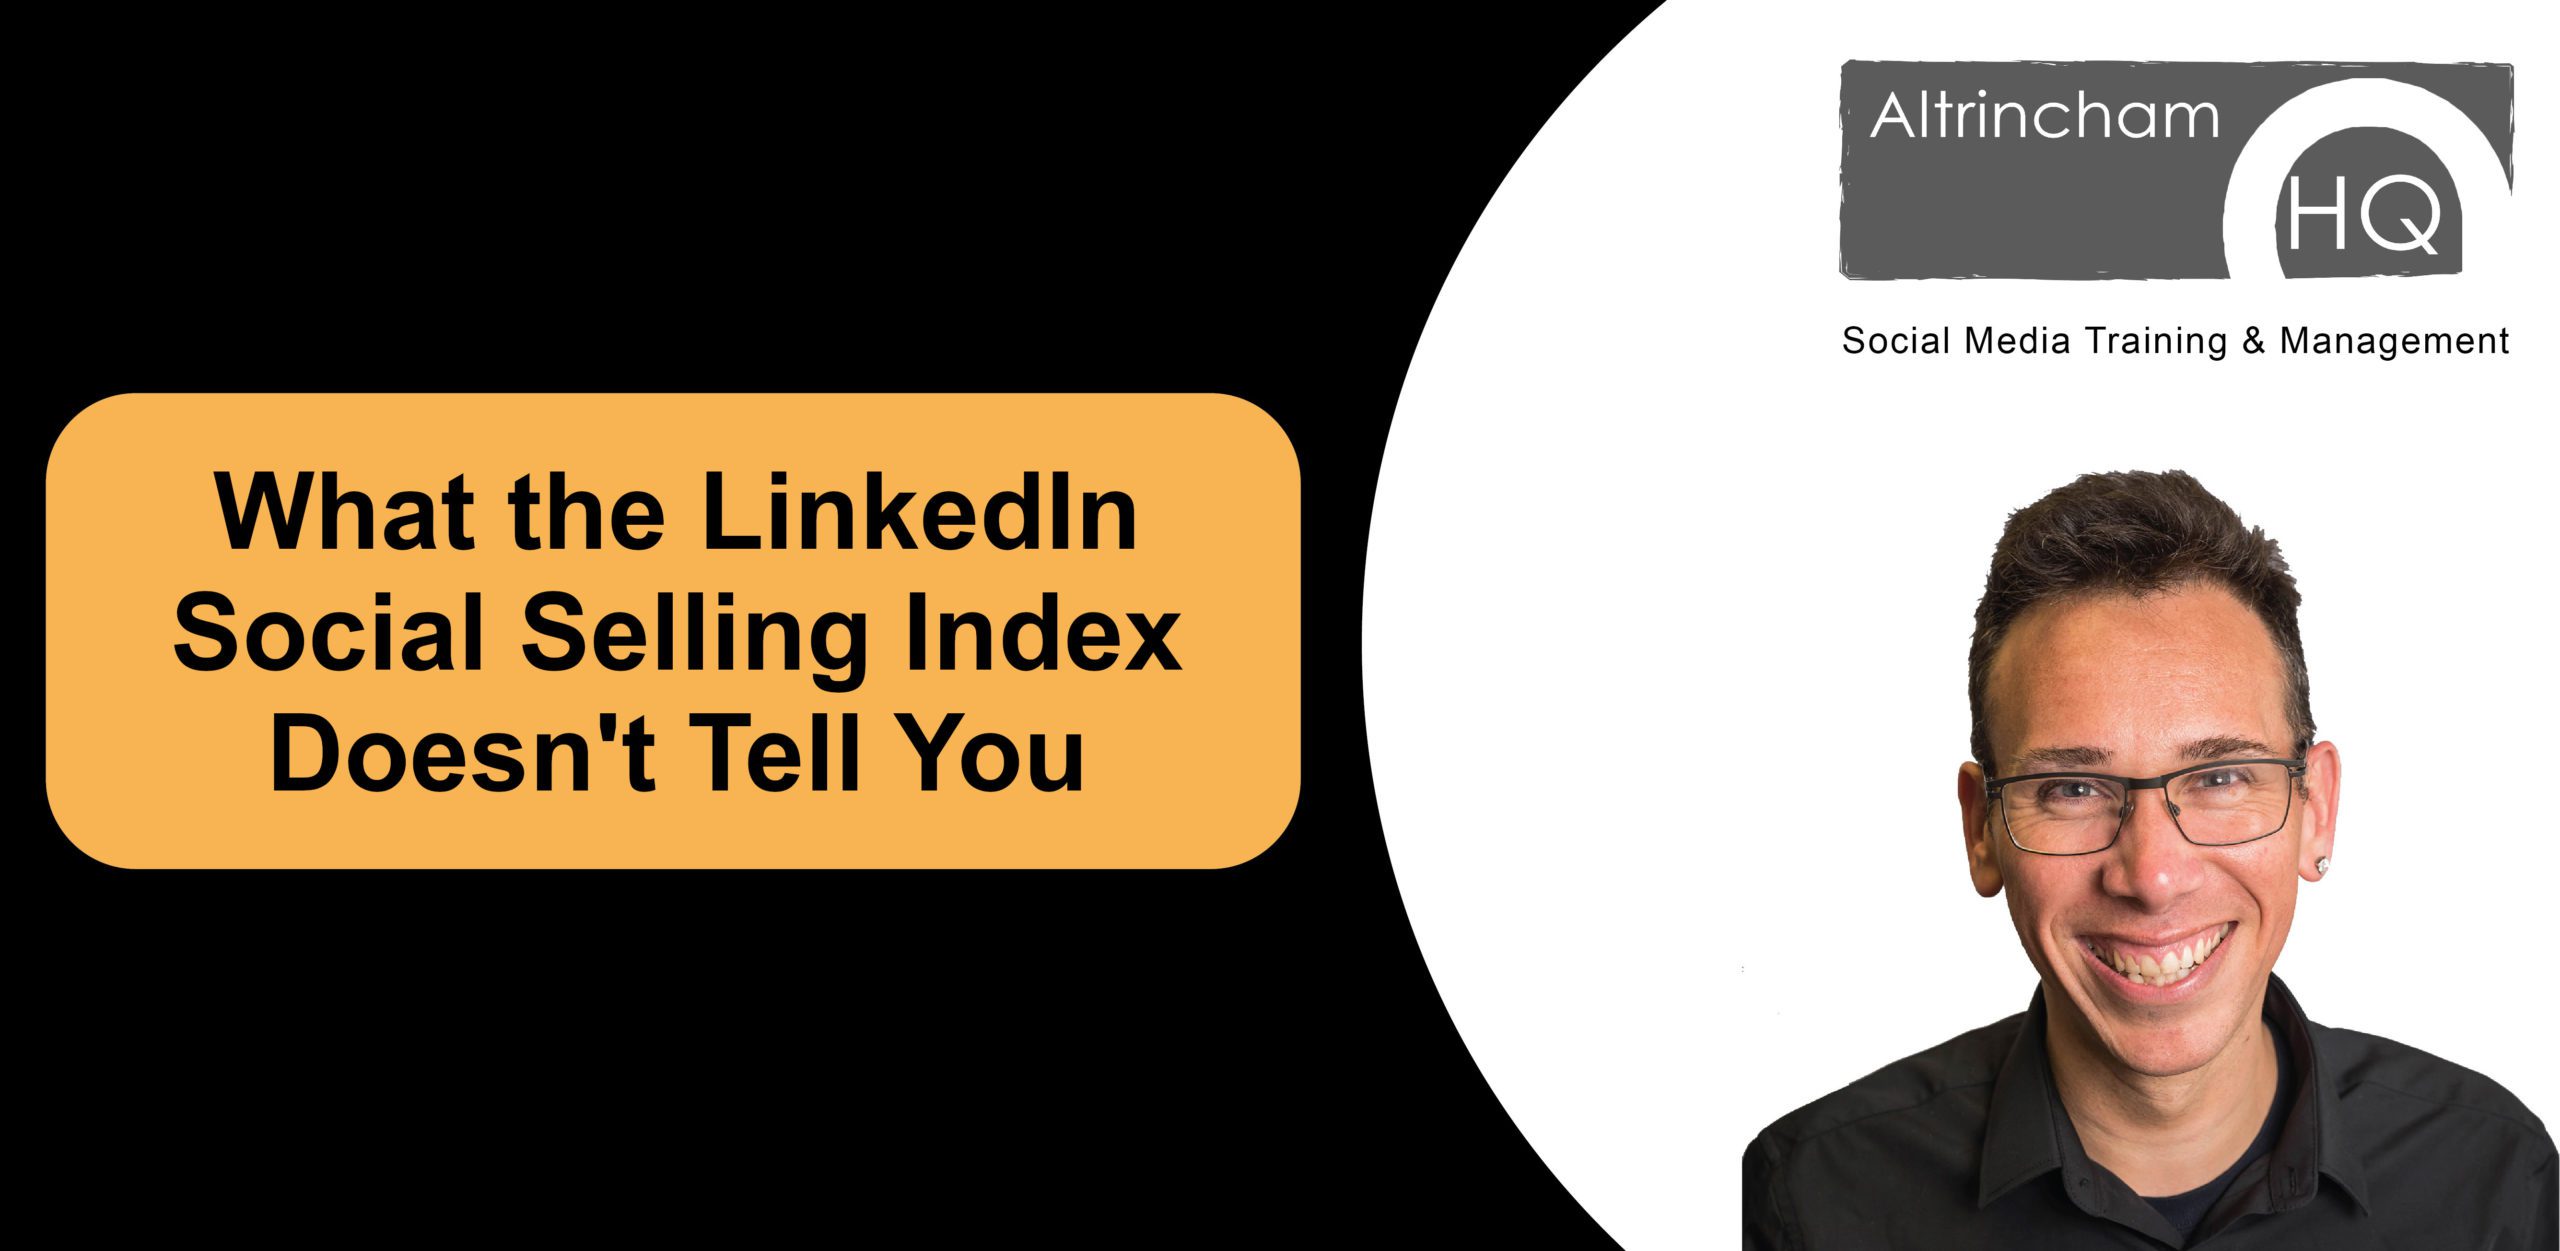 What the LinkedIn Social Selling Index Doesn’t Tell You